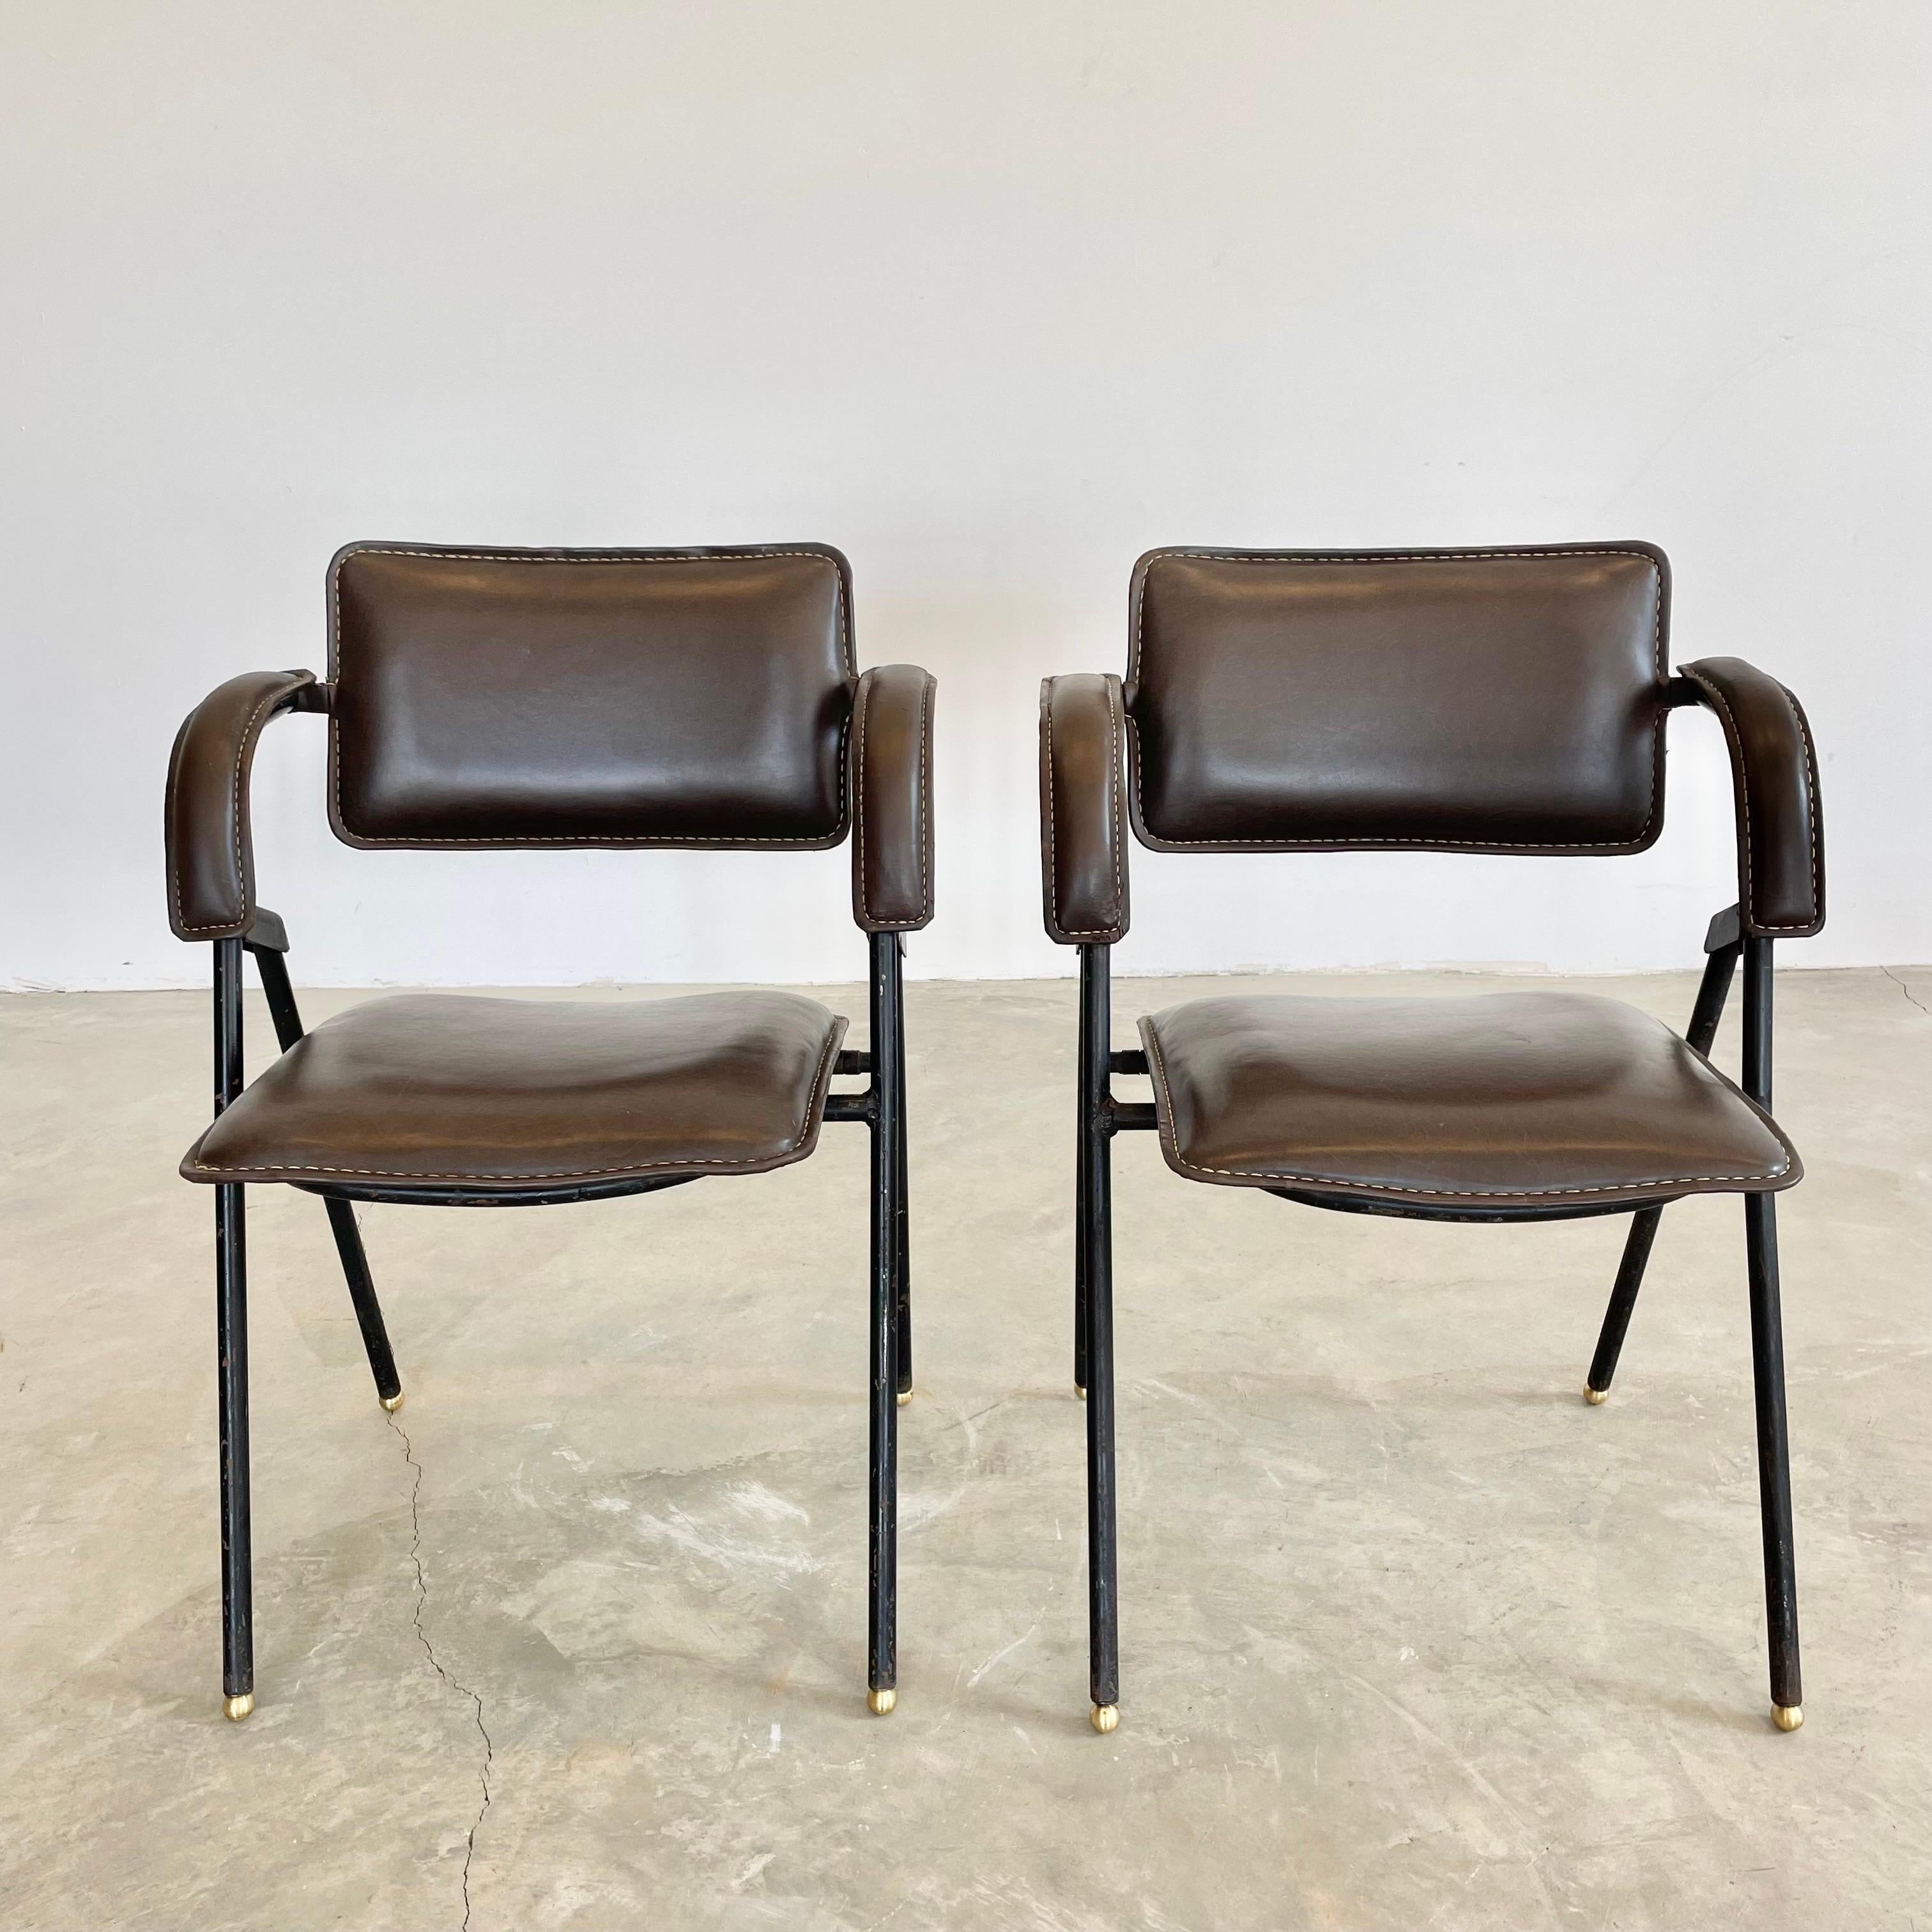 Jacques Adnet Armchair, 1950s, France For Sale 1